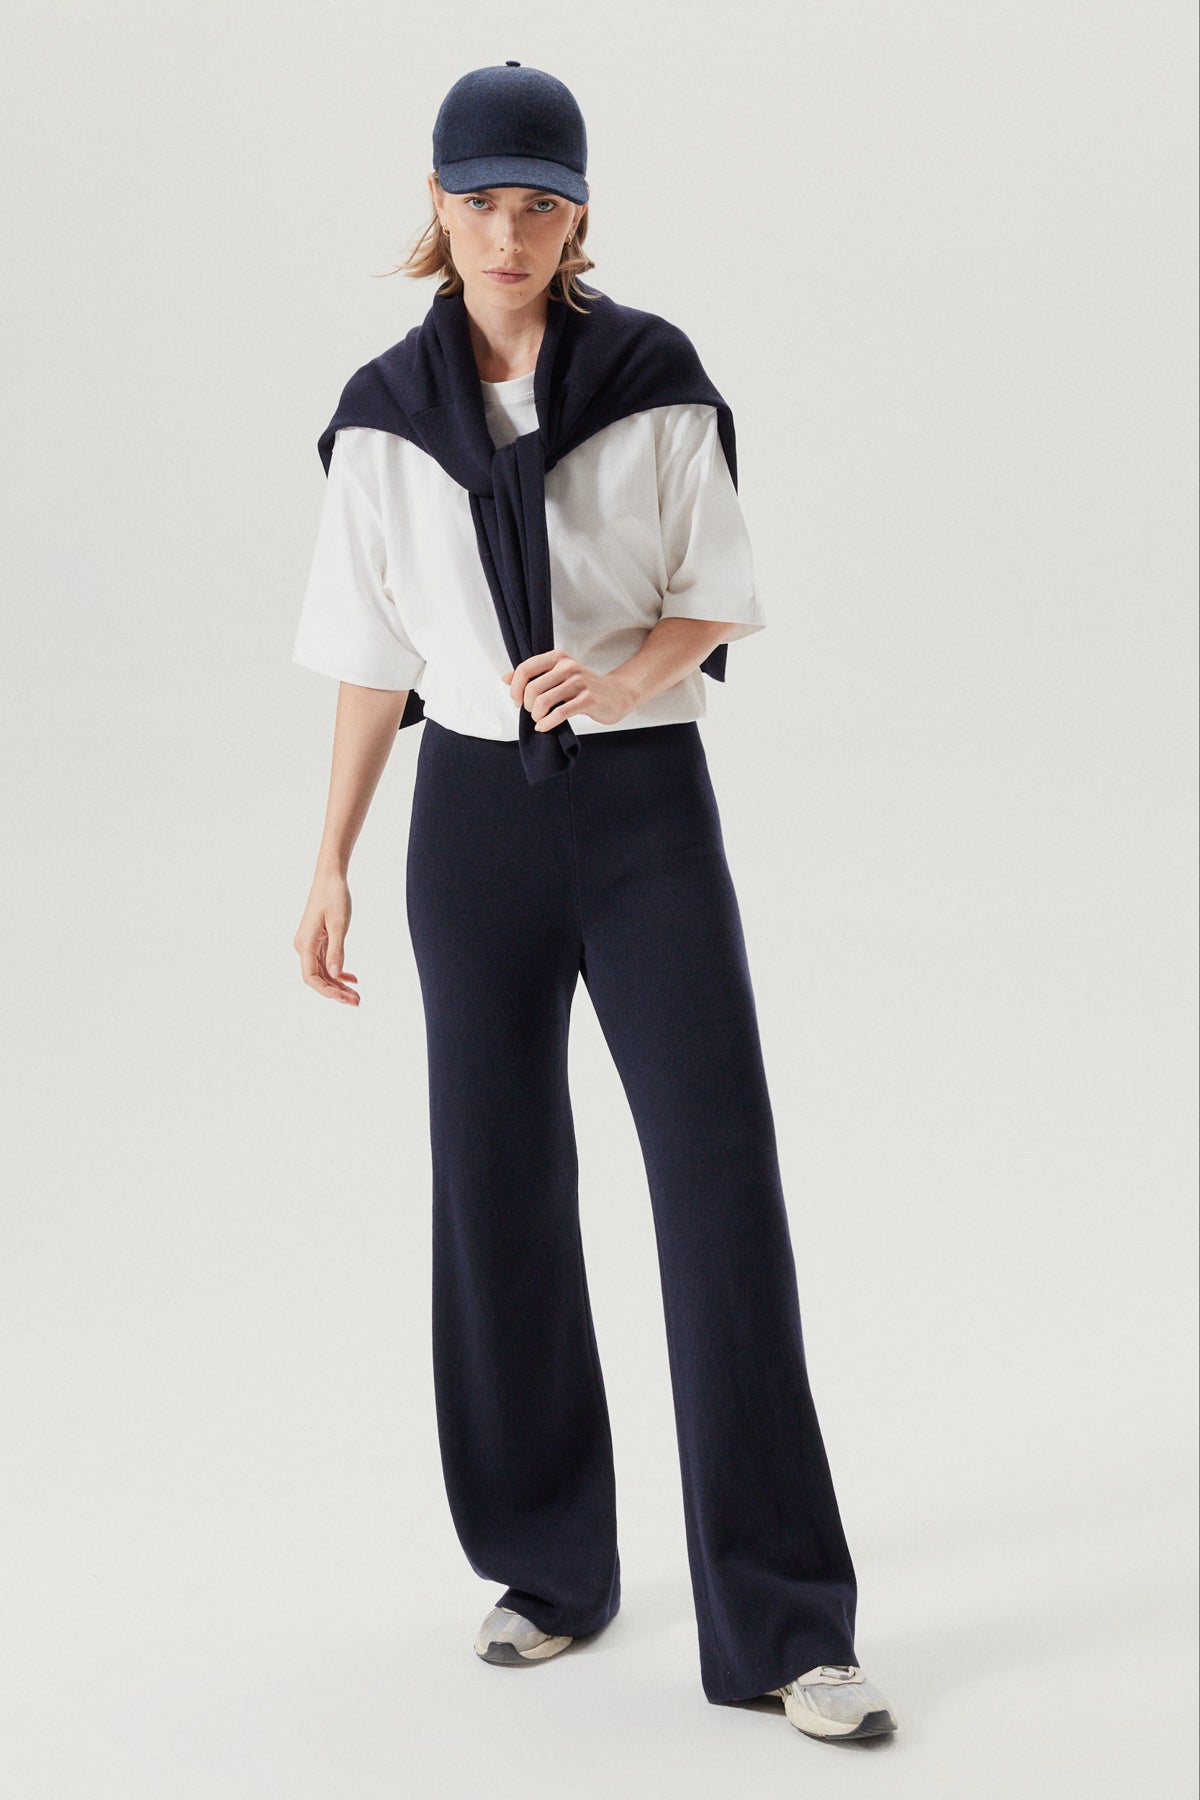 Classic Blue | The Cashmere Palazzo Pants